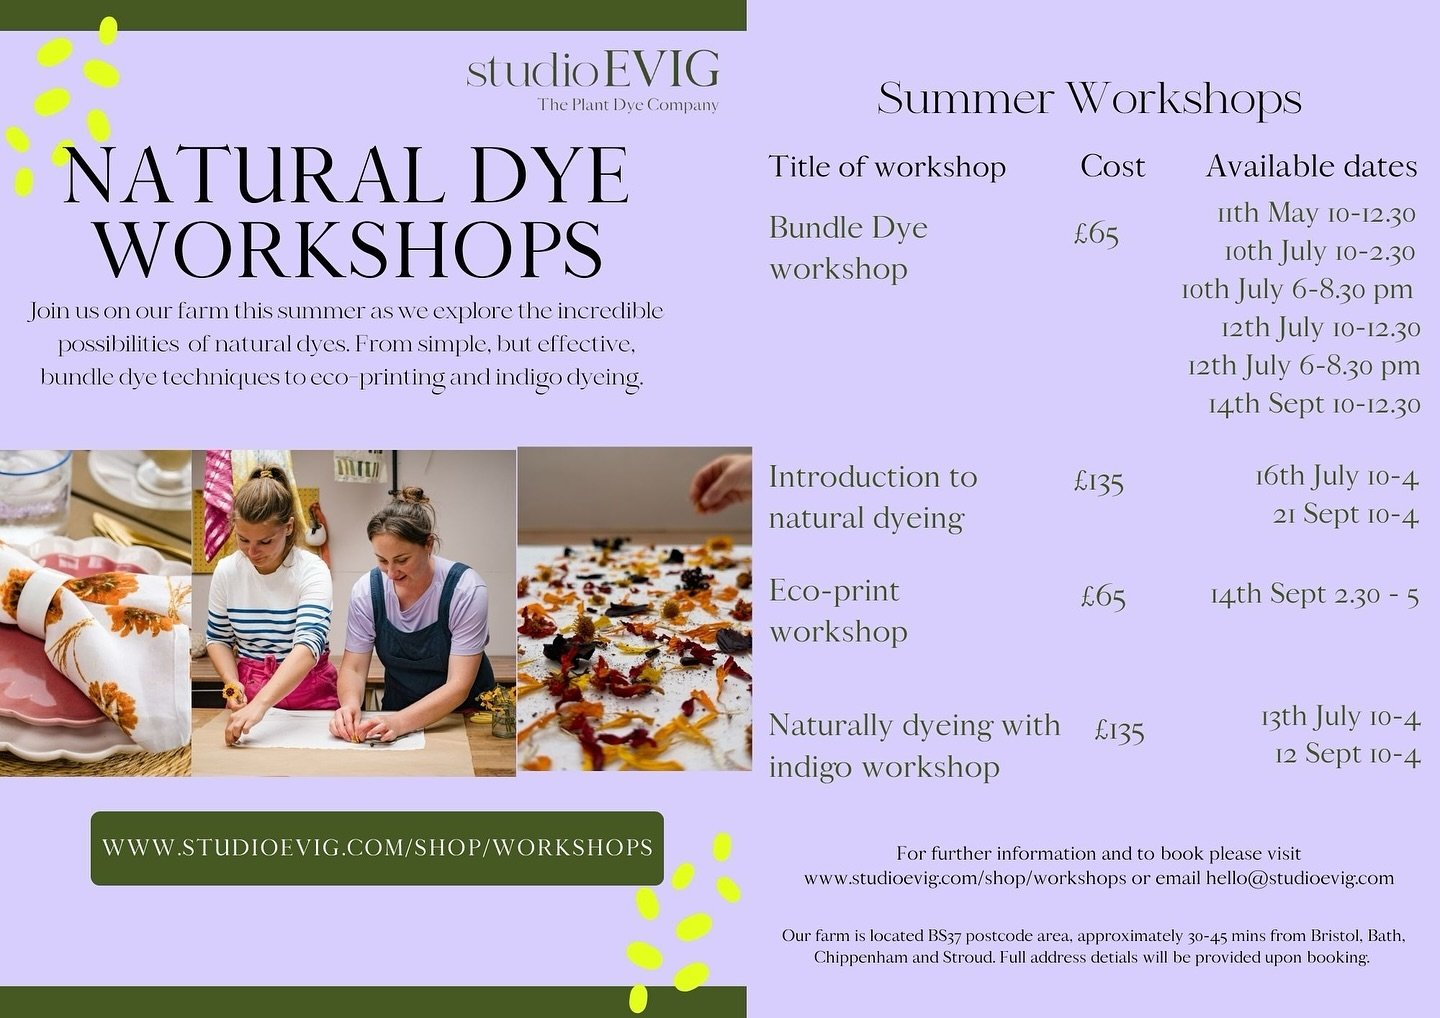 W O R K S H O P S 

Join us this summer to discover the captivating and colourful world of natural dyeing. We are excited to host a range of workshops at our dyeing farm and studio in Gloucestershire. 

If the dates don&rsquo;t suit or you would like